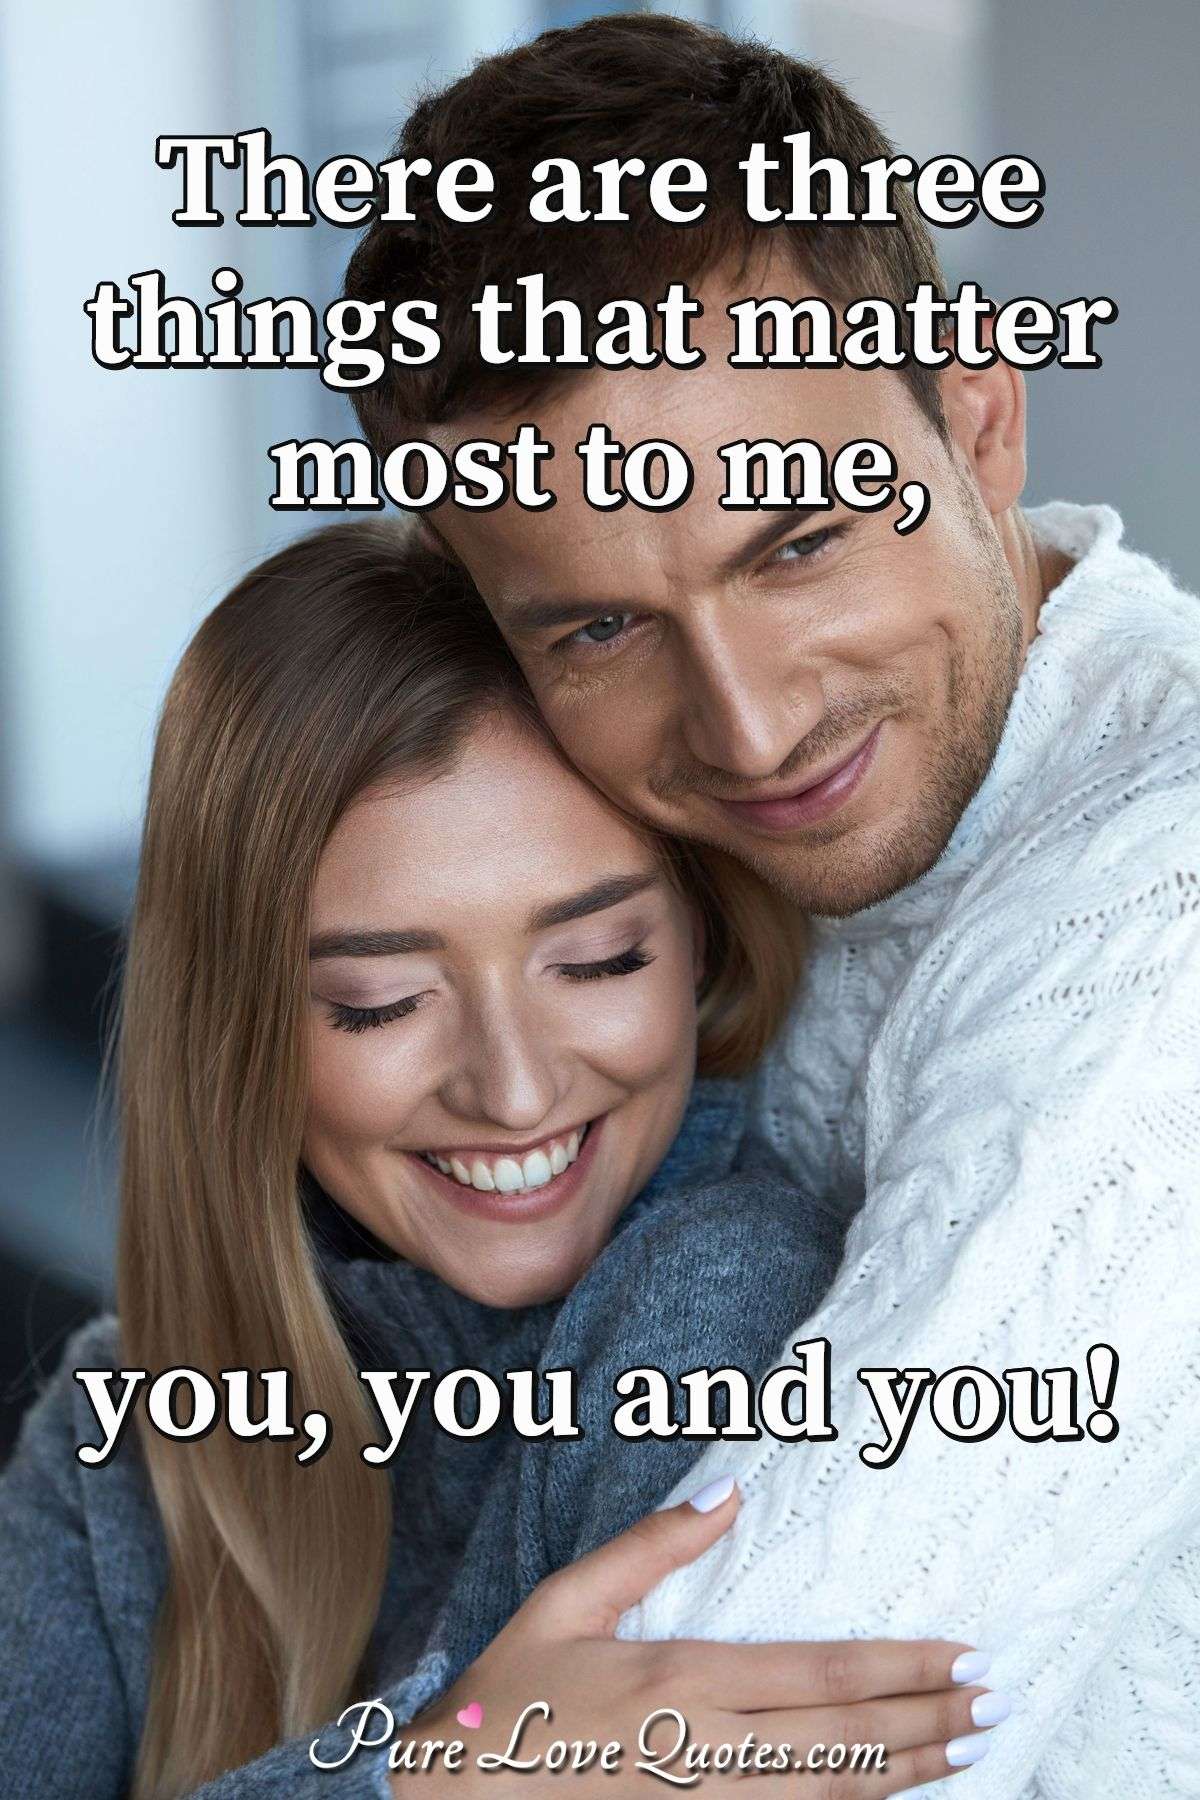 There are three things that matter most to me, you, you and you! - PureLoveQuotes.com